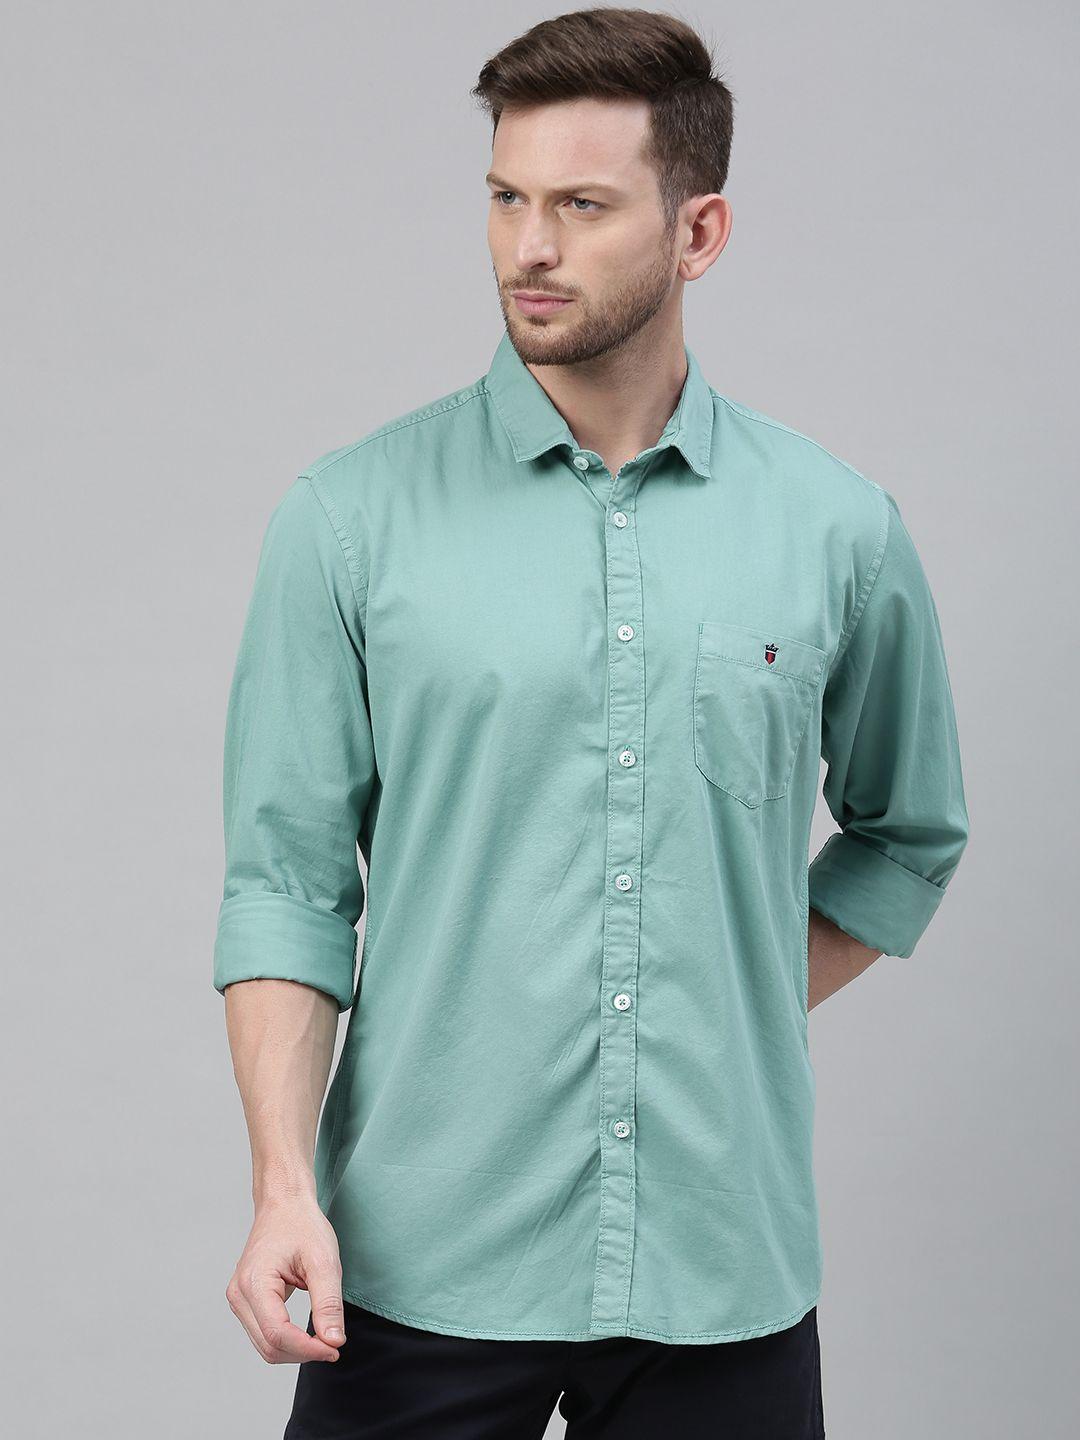 louis philippe jeans men green slim fit solid casual shirt